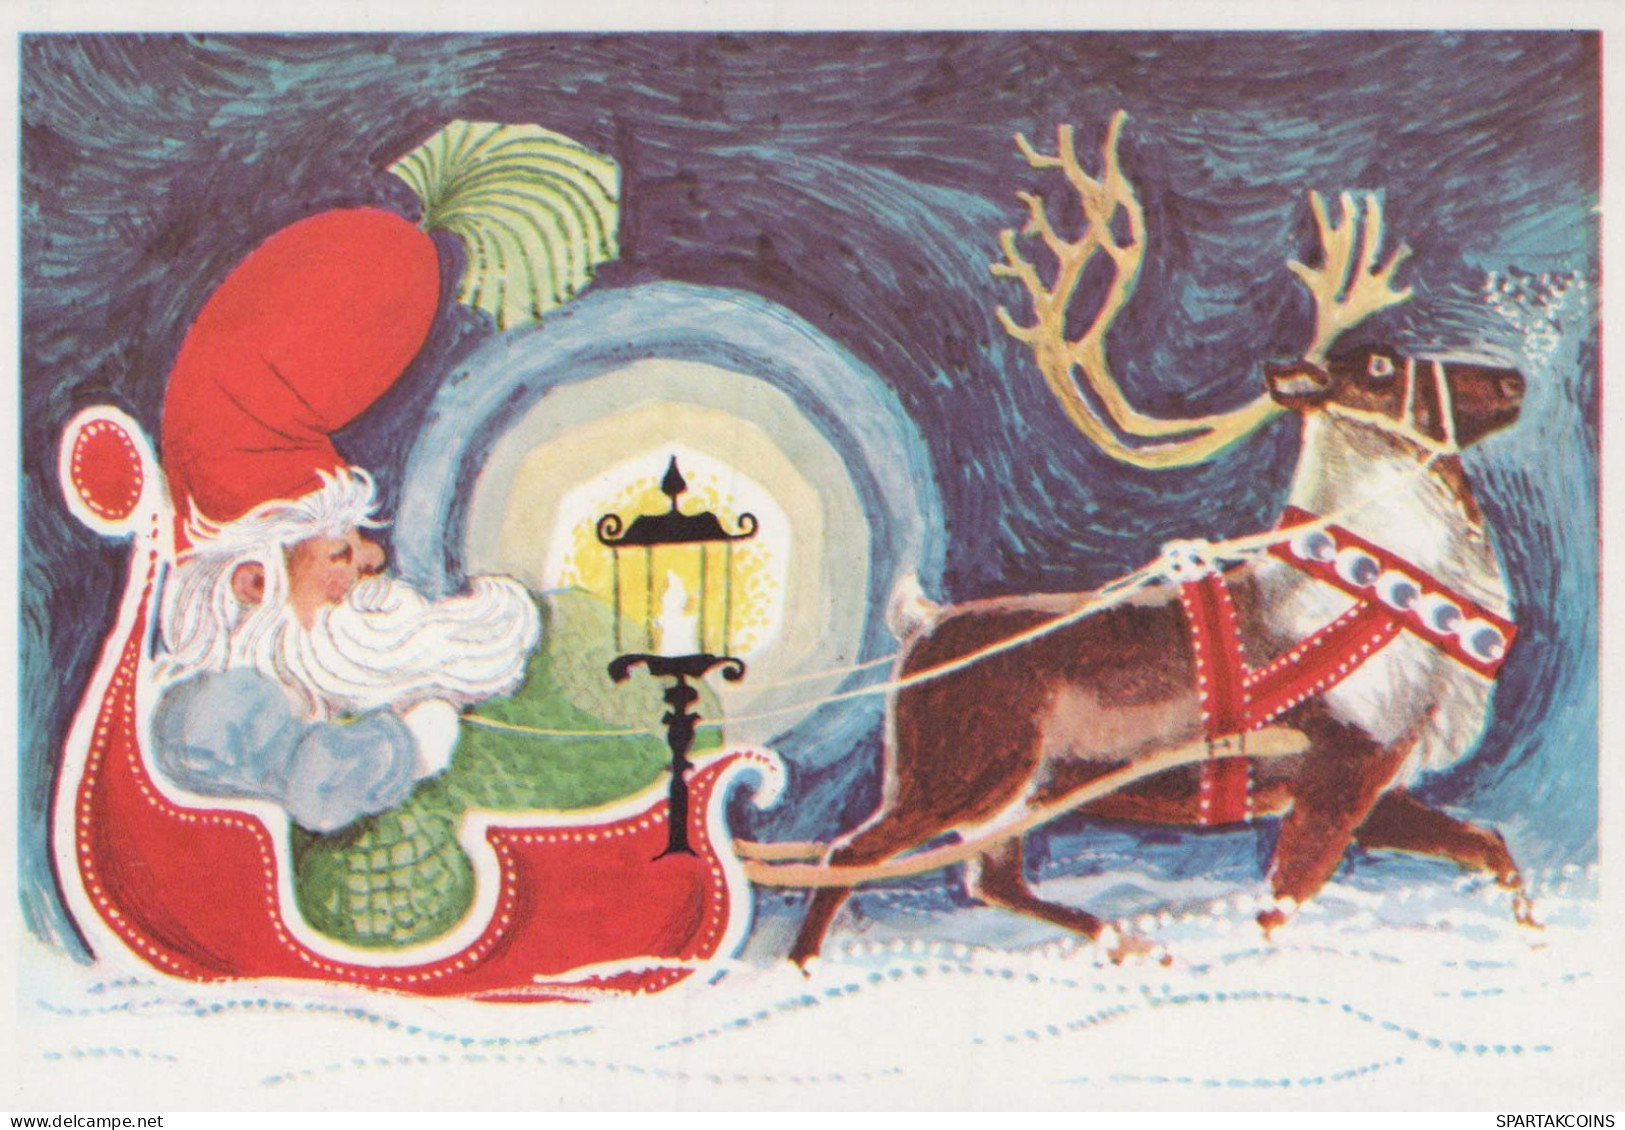 BABBO NATALE Buon Anno Natale Vintage Cartolina CPSM #PBL562.IT - Kerstman